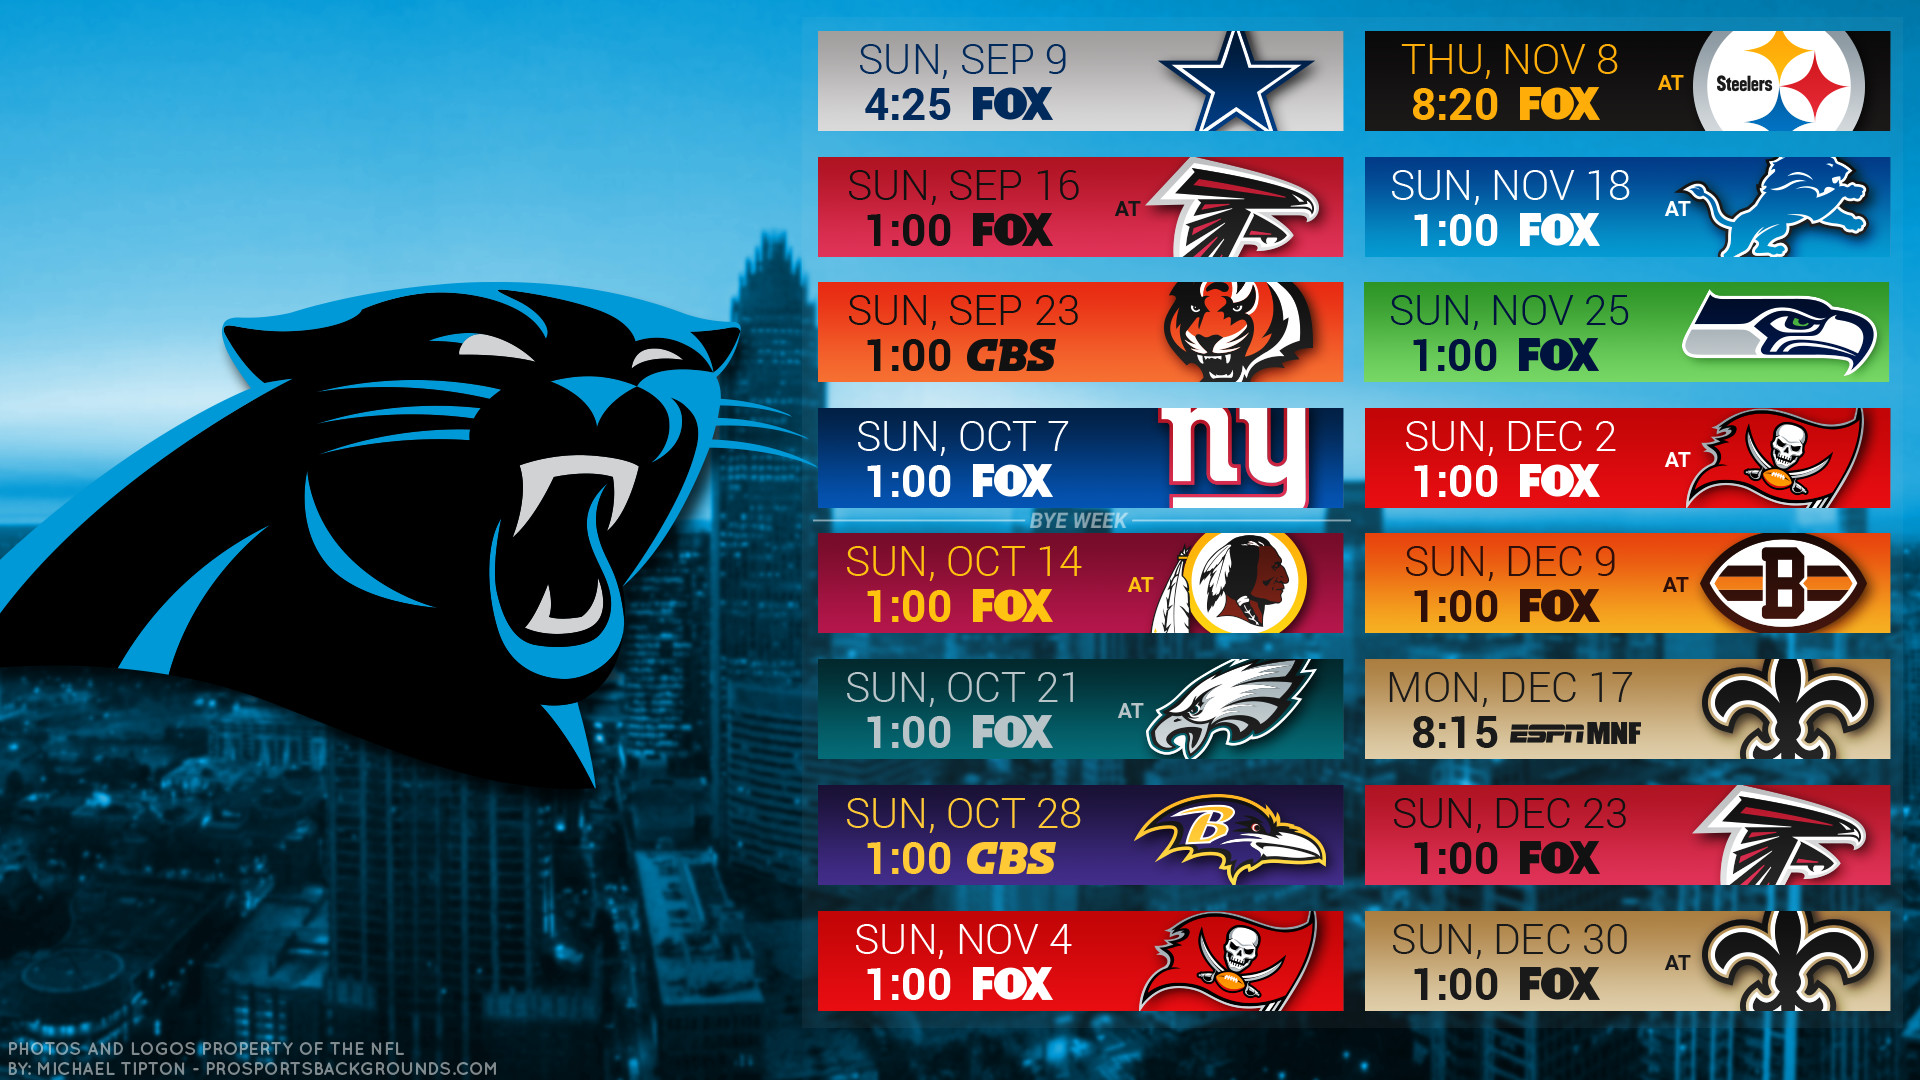 1920x1080 Carolina Panthers 2018 schedule city logo wallpaper free for desktop pc  iphone galaxy and andriod printable